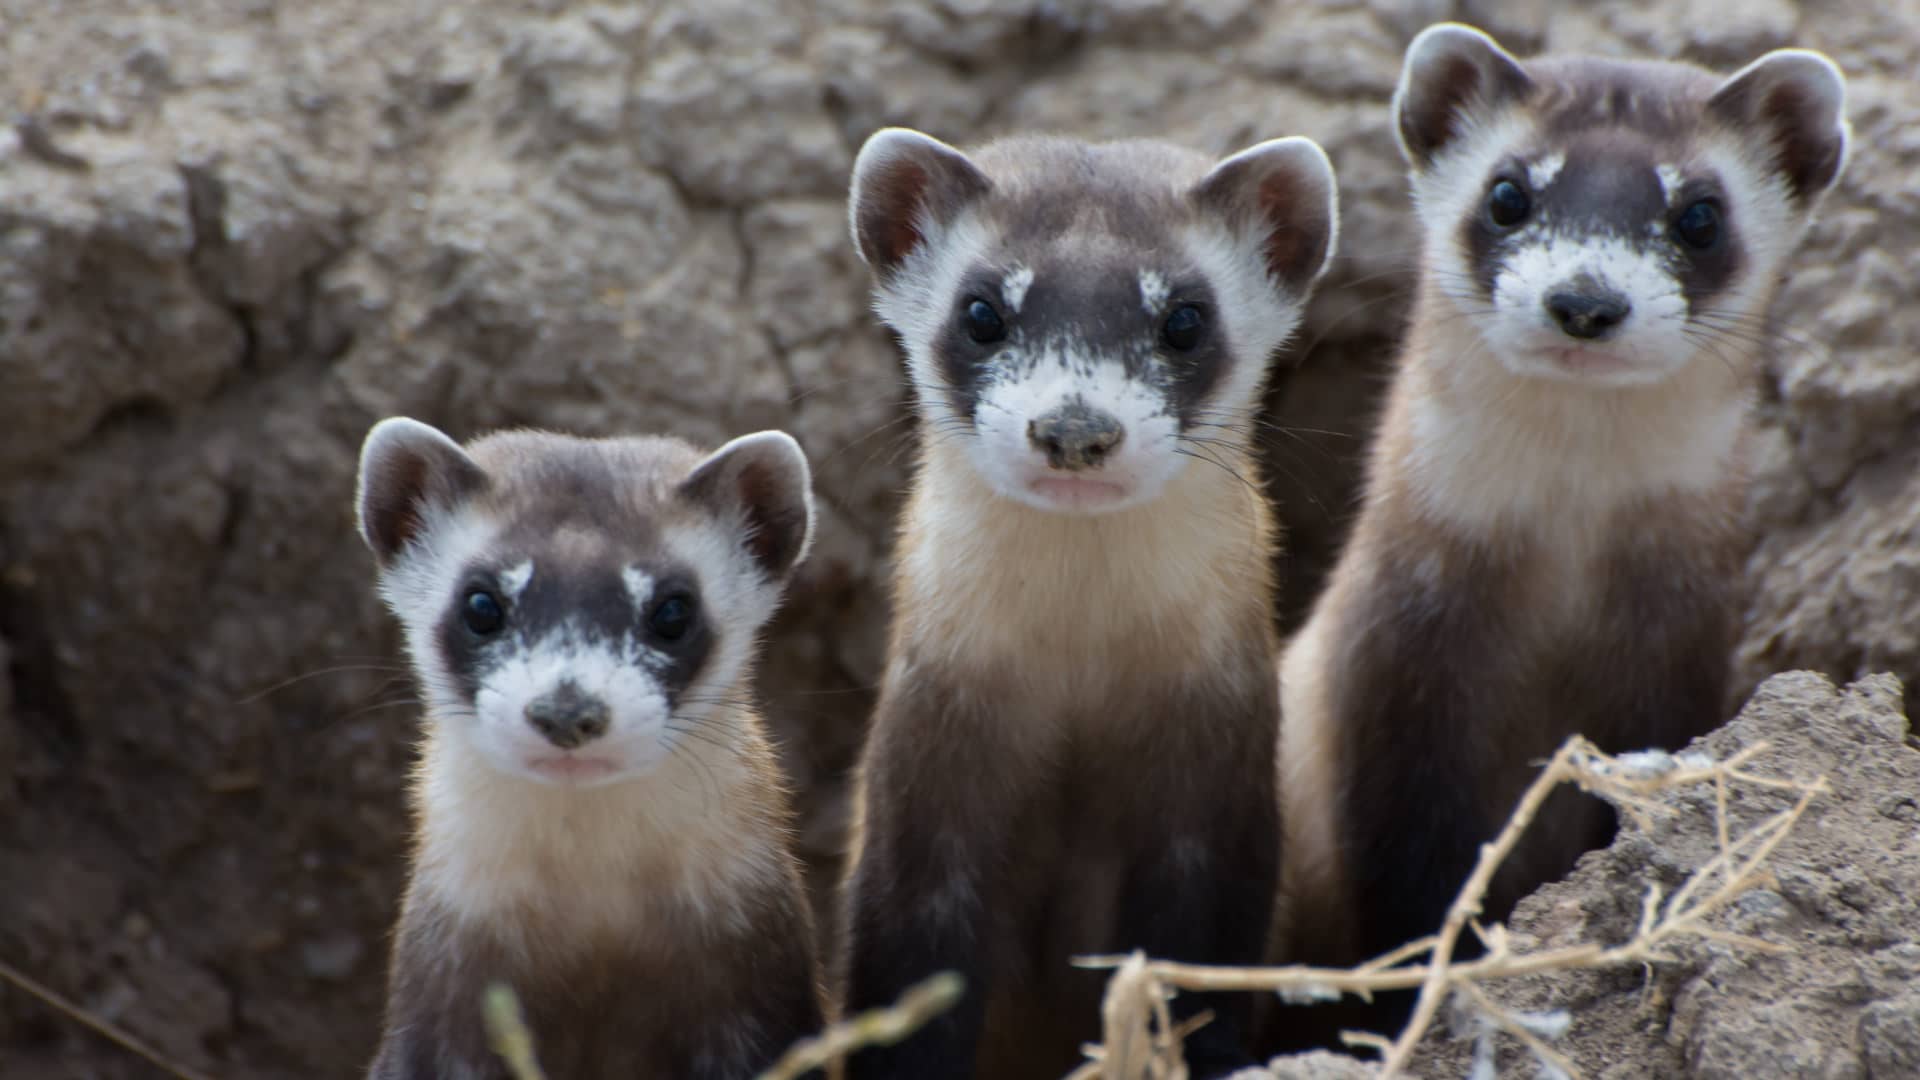 Black-footed ferrets used to live across the American West, but by 1979 they were thought to be extinct. Now, about 300 live in captive breeding programs and 400 have been reintroduced to the wild.